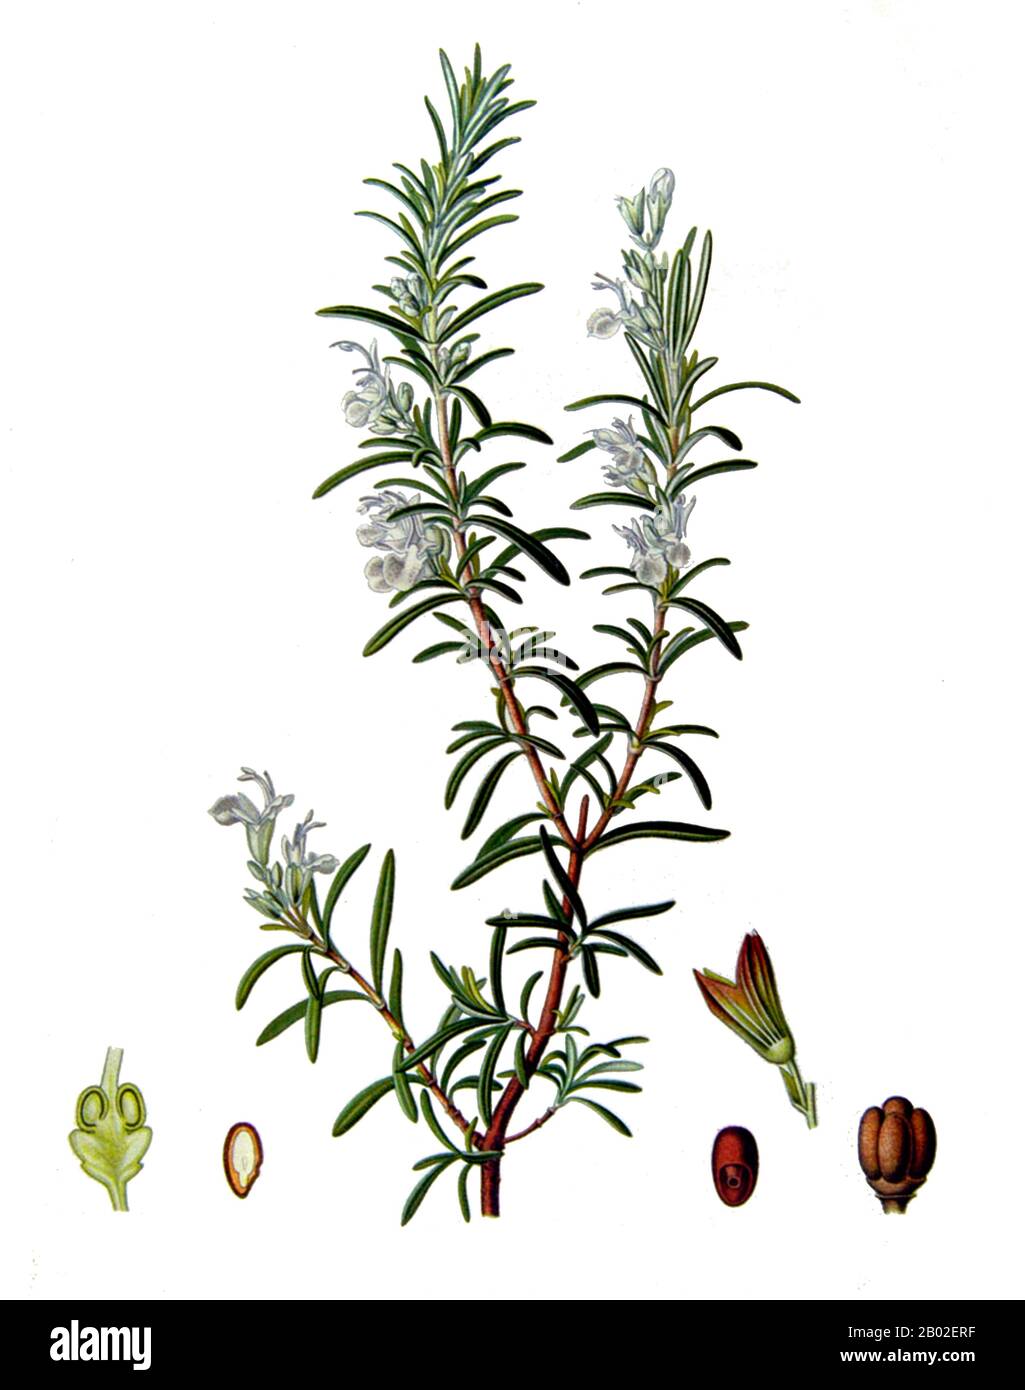 Rosmarinus officinalis, commonly known as rosemary, is a woody, perennial herb with fragrant, evergreen, needle-like leaves and white, pink, purple, or blue flowers, native to the Mediterranean region. It is a member of the mint family Lamiaceae, which includes many other herbs.  The name 'rosemary' derives from the Latin for 'dew' (ros) and 'sea' (marinus), or 'dew of the sea. The plant is also sometimes called anthos, from the ancient Greek word ἄνθος, meaning 'flower'. Stock Photo